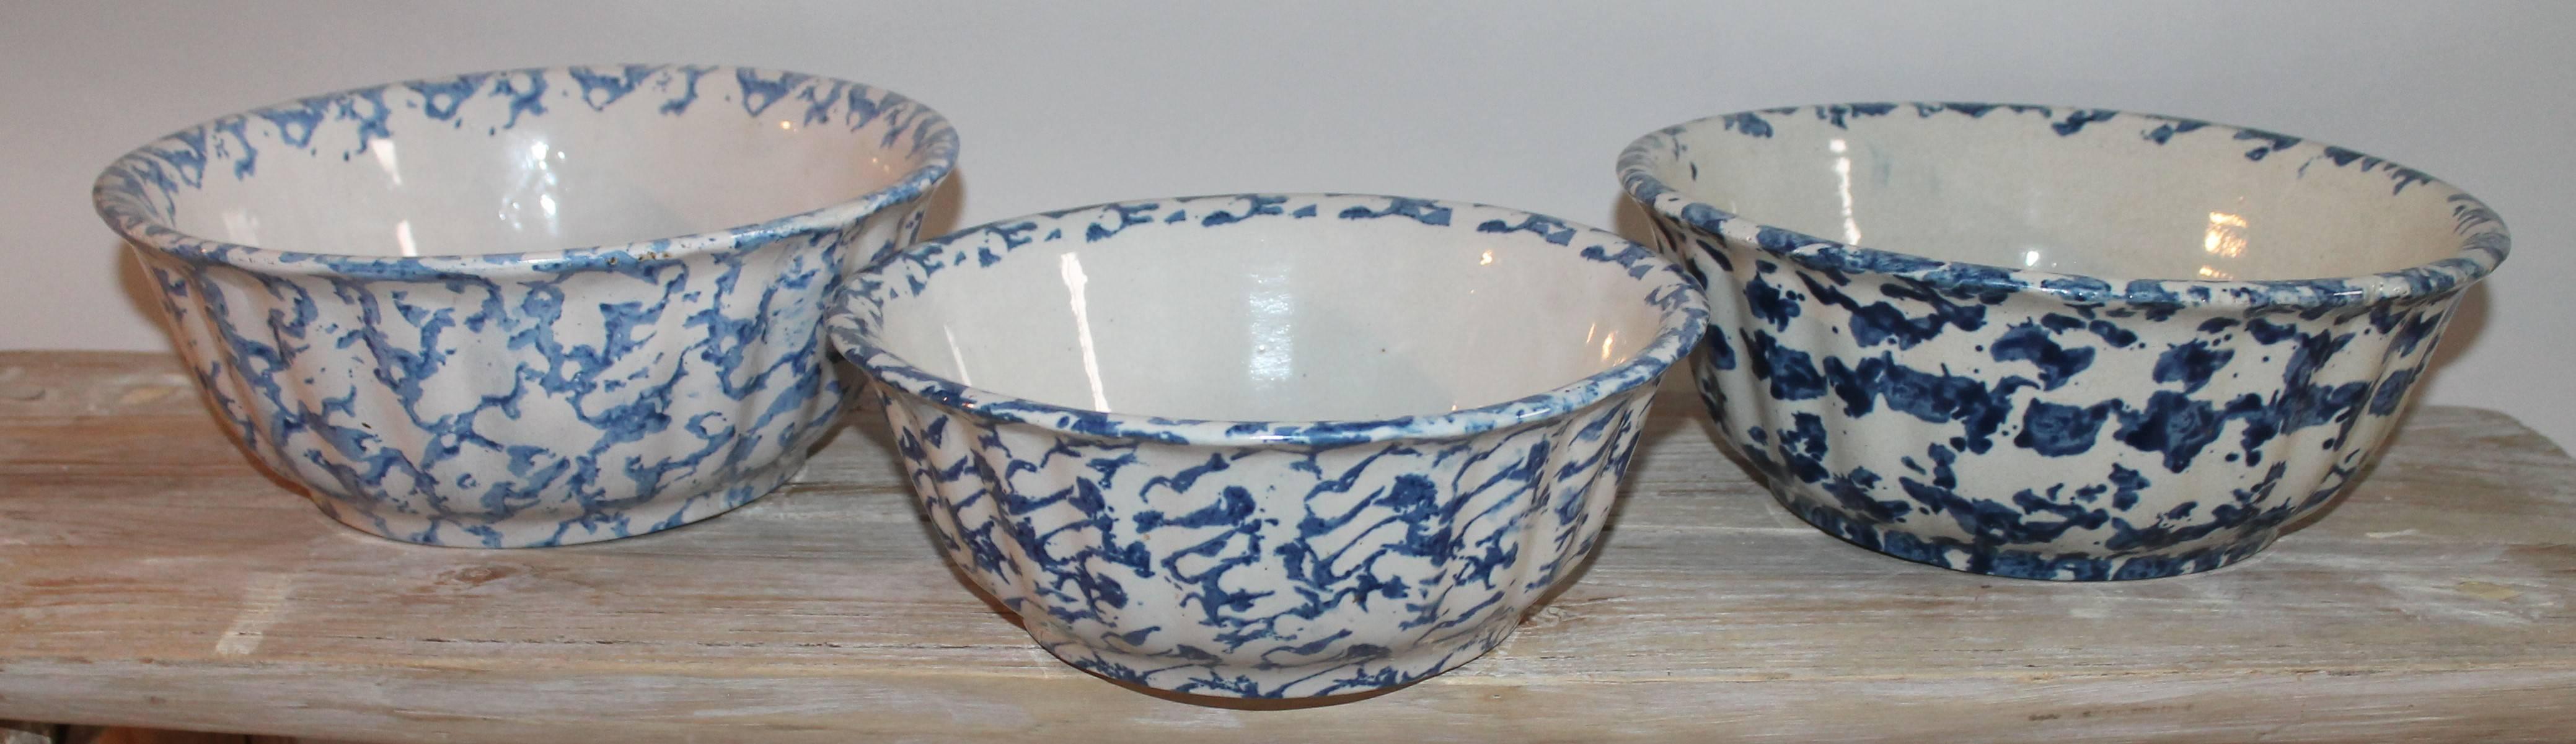 19th century scalloped sponge ware pottery bowls in different shades of blue. All in great condition and selling as a collection of three.

Small bowl measures 10 x 4 
Larger bowls measure 11 x 4.5.